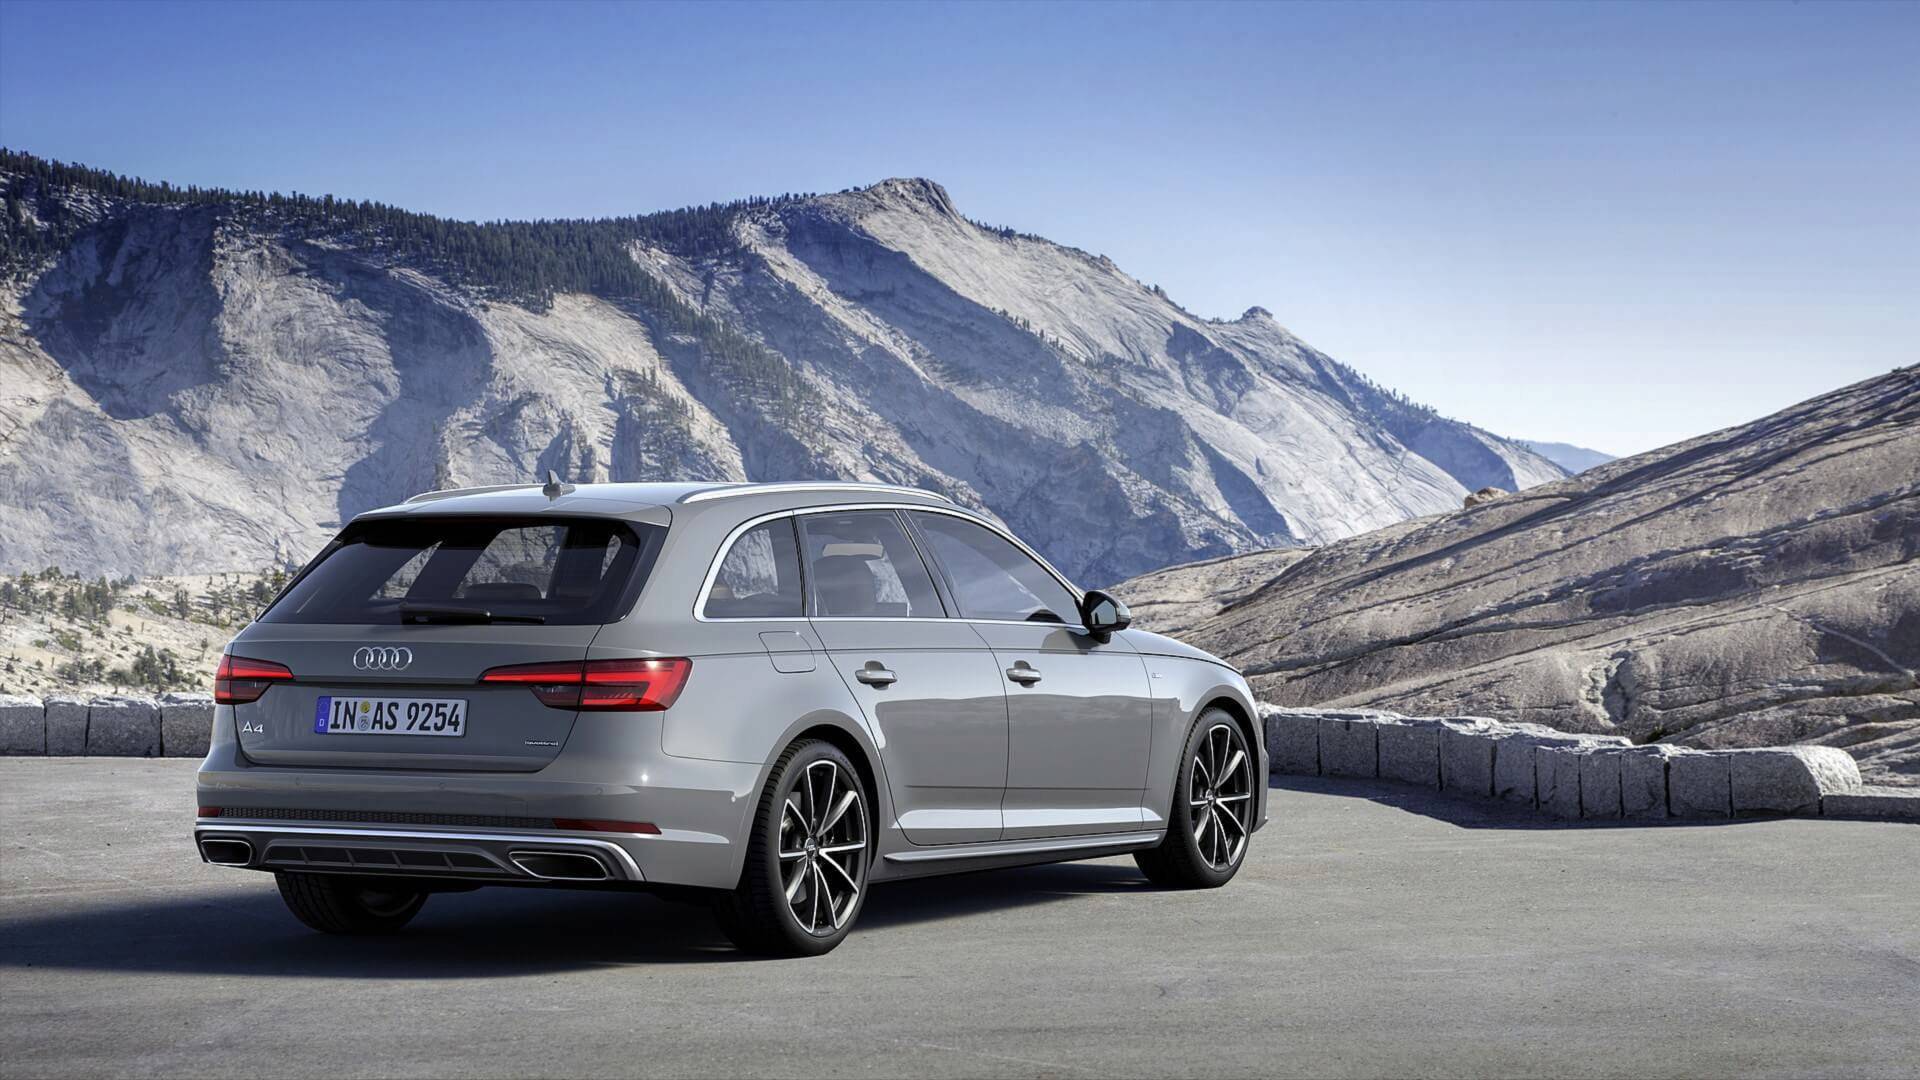 2019 Audi A4 Facelift Doesn't Look All That Different From ...